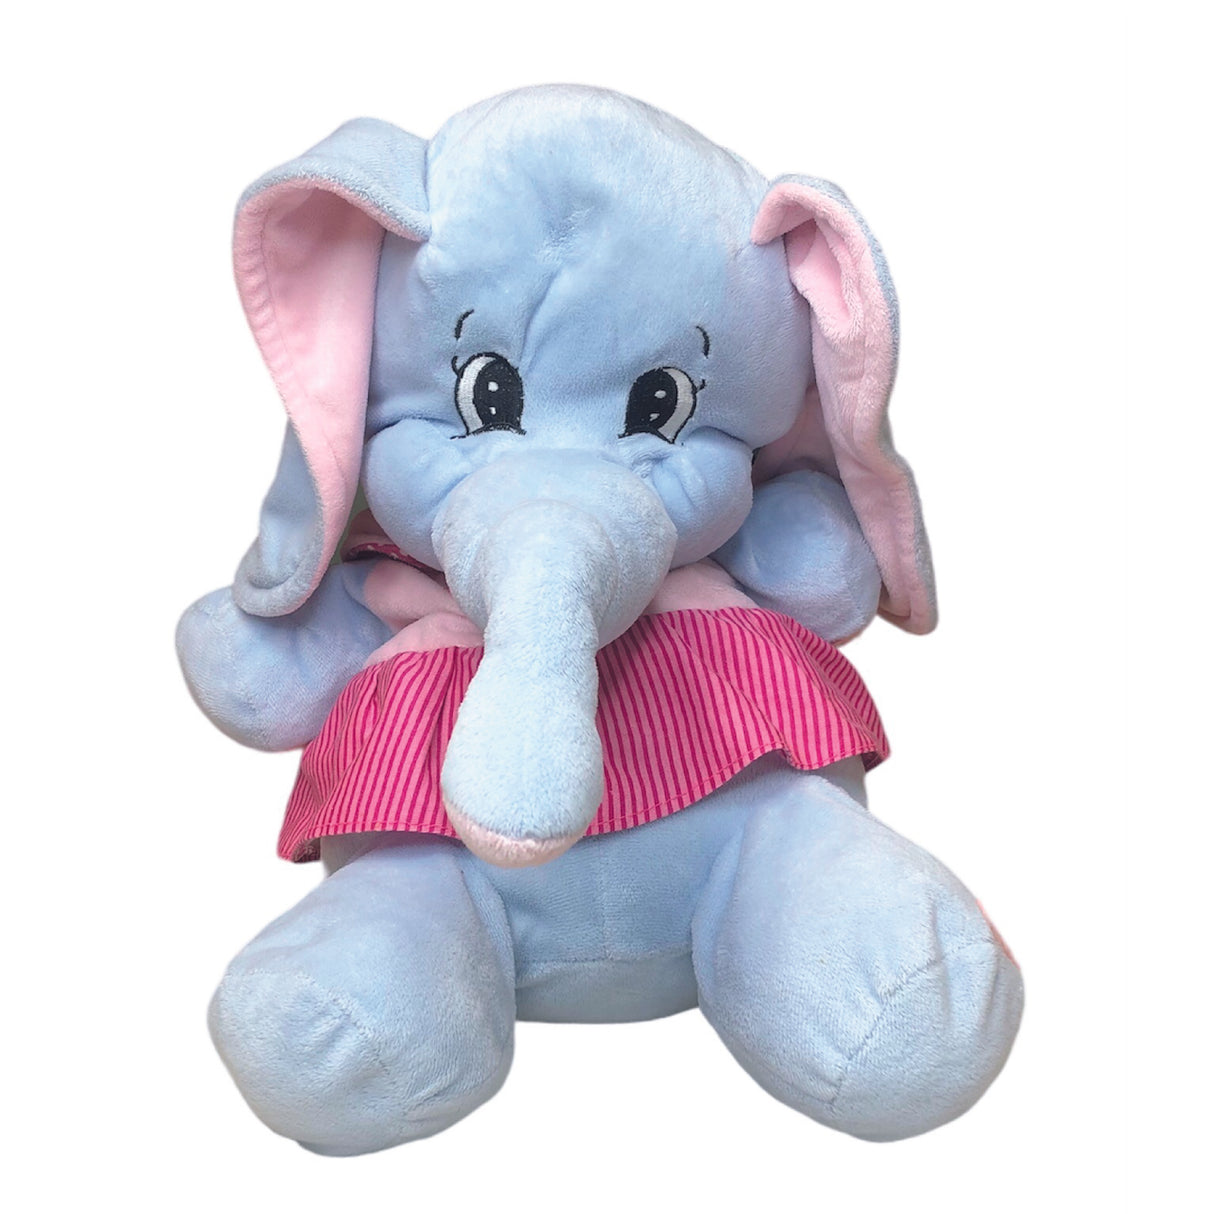 A Second chance - Elephant toy kids- Delivery All Over Lebanon